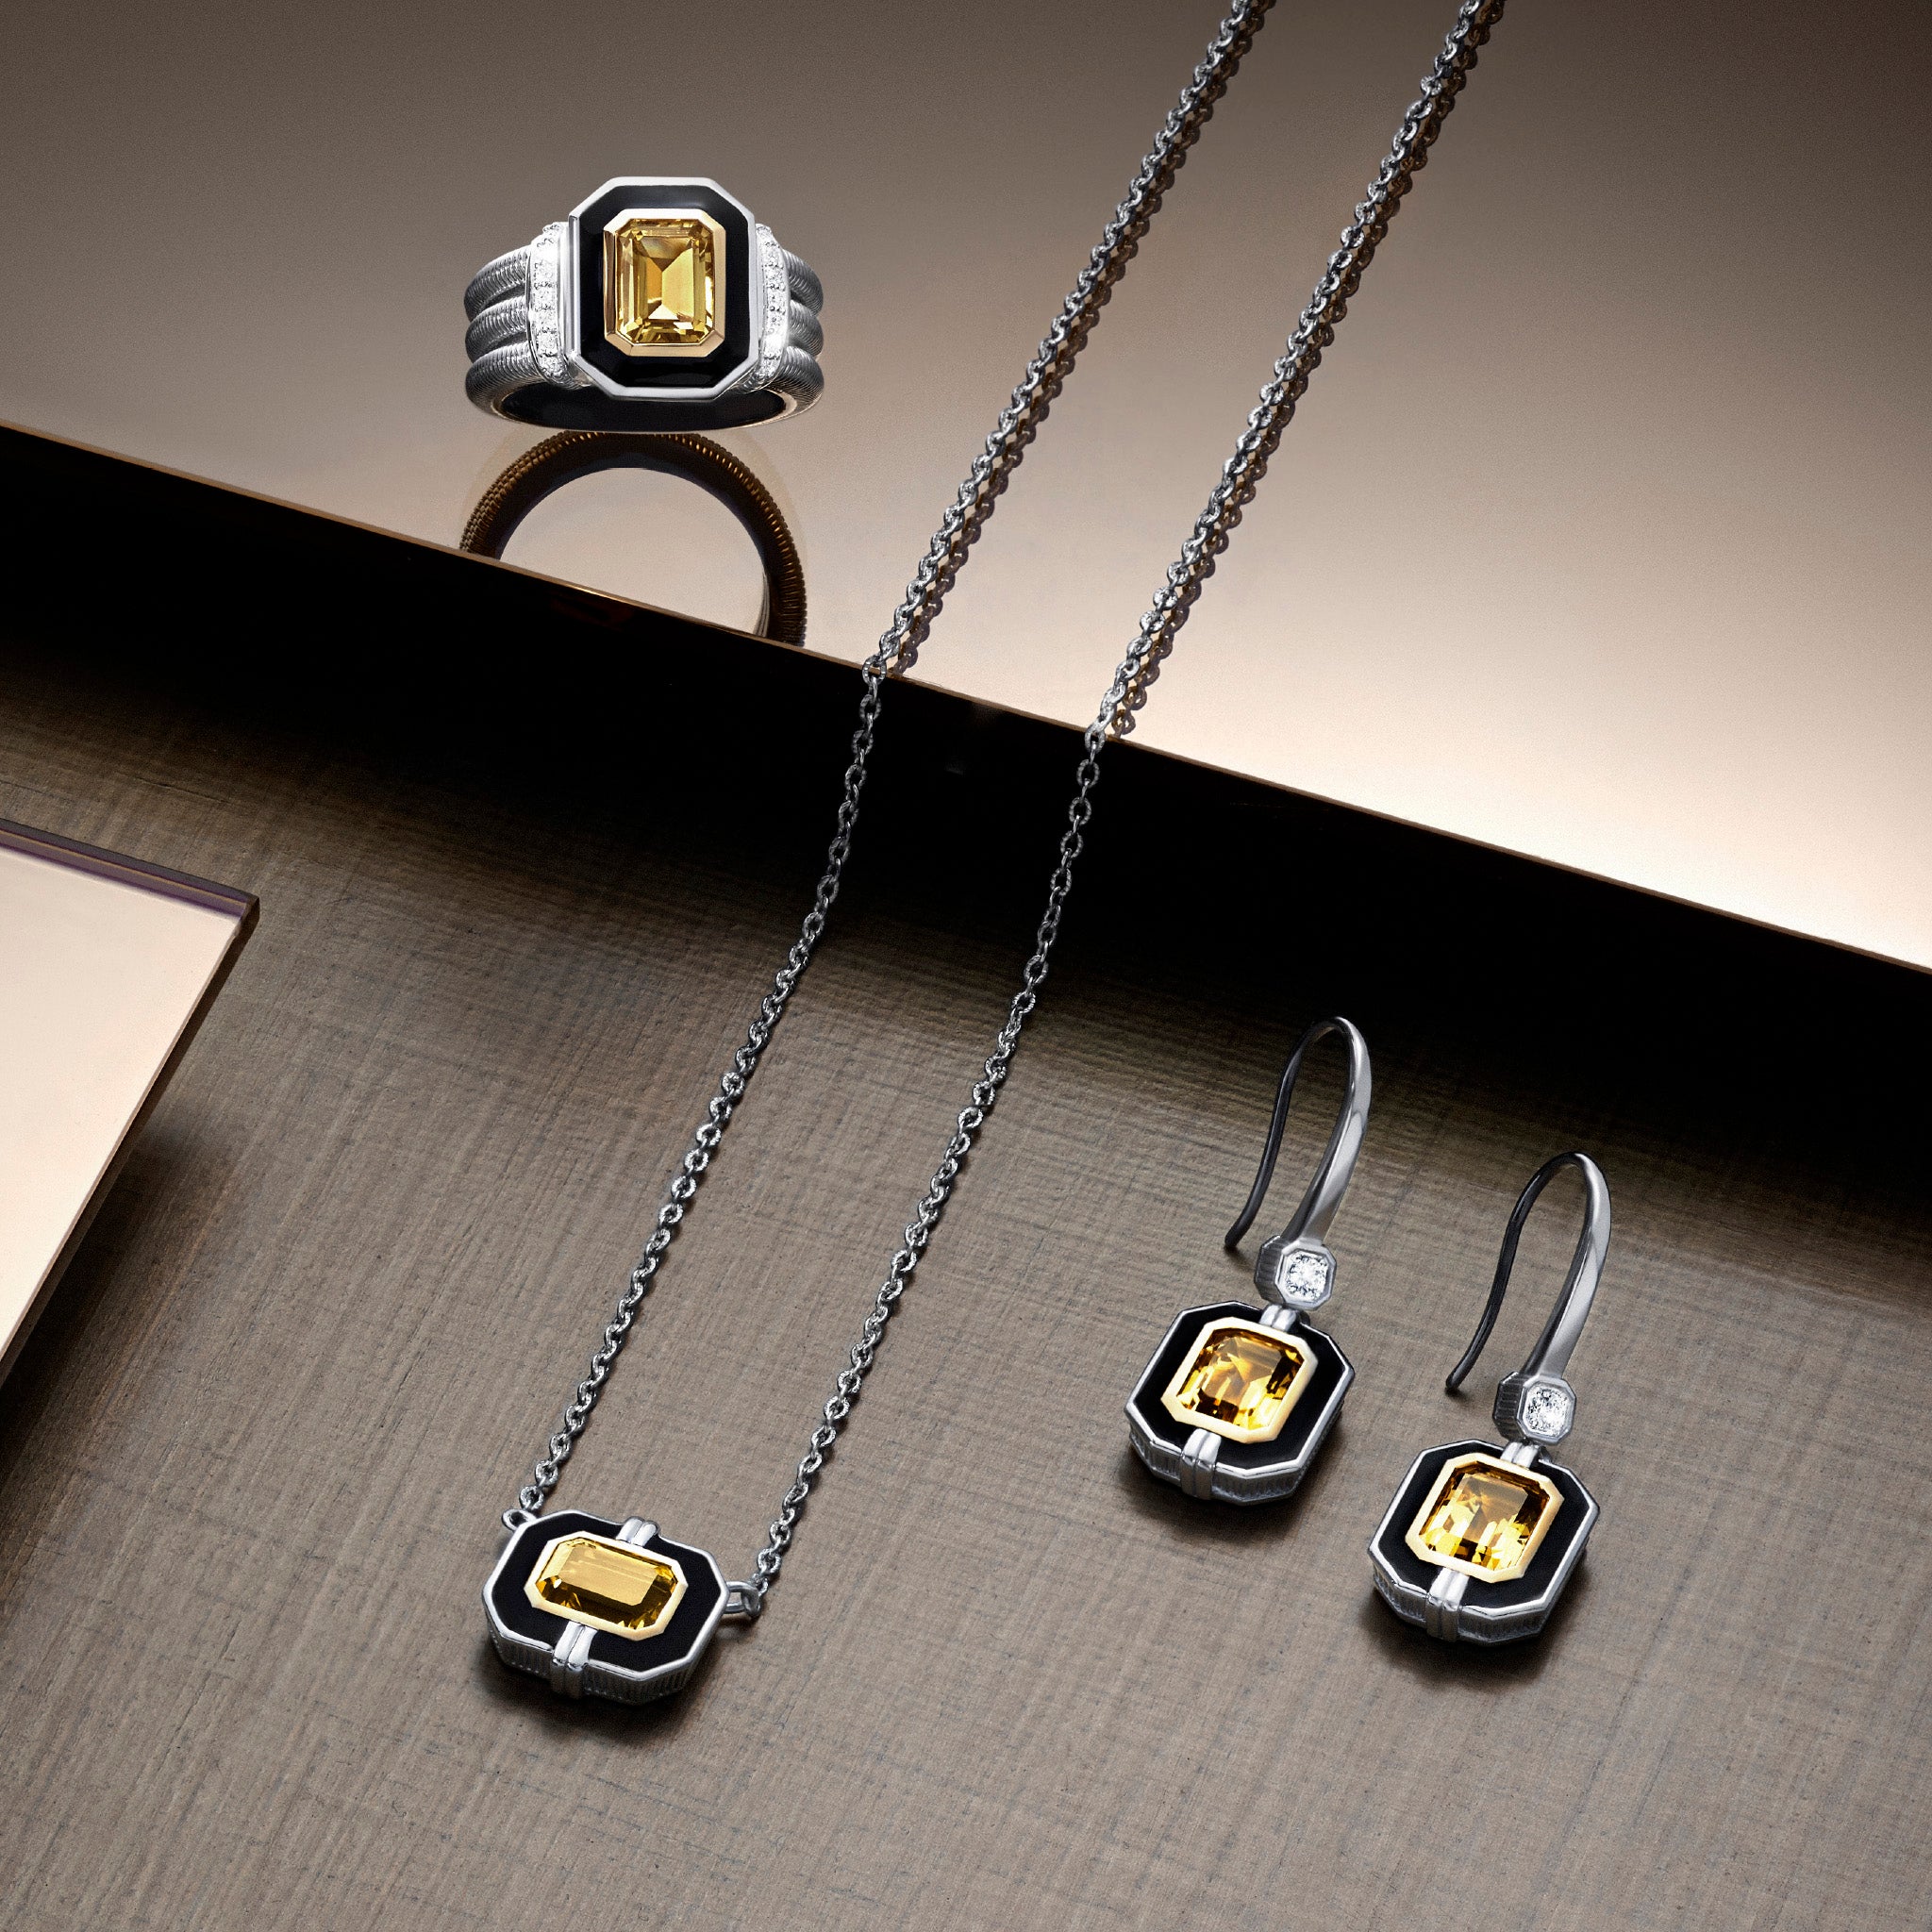 Adrienne Drop Earrings with Enamel, Champagne Citrine, Diamonds and 18K Gold